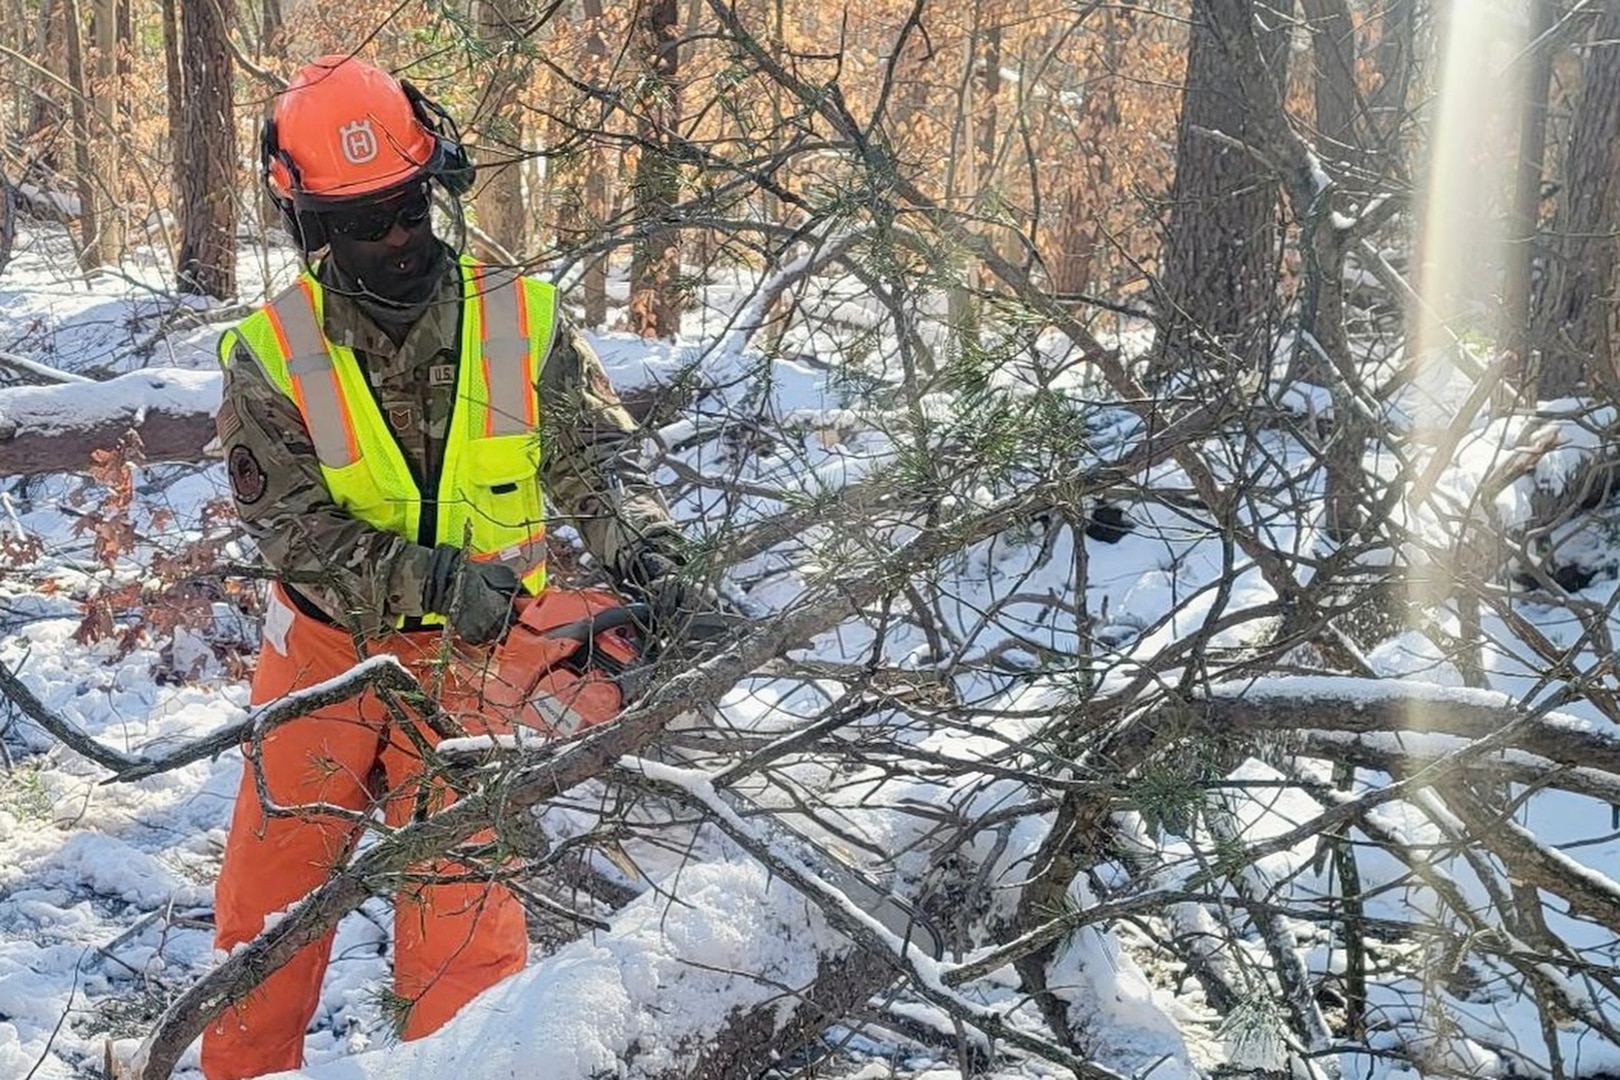 VNG troops help open roads, clear trees along power line routes